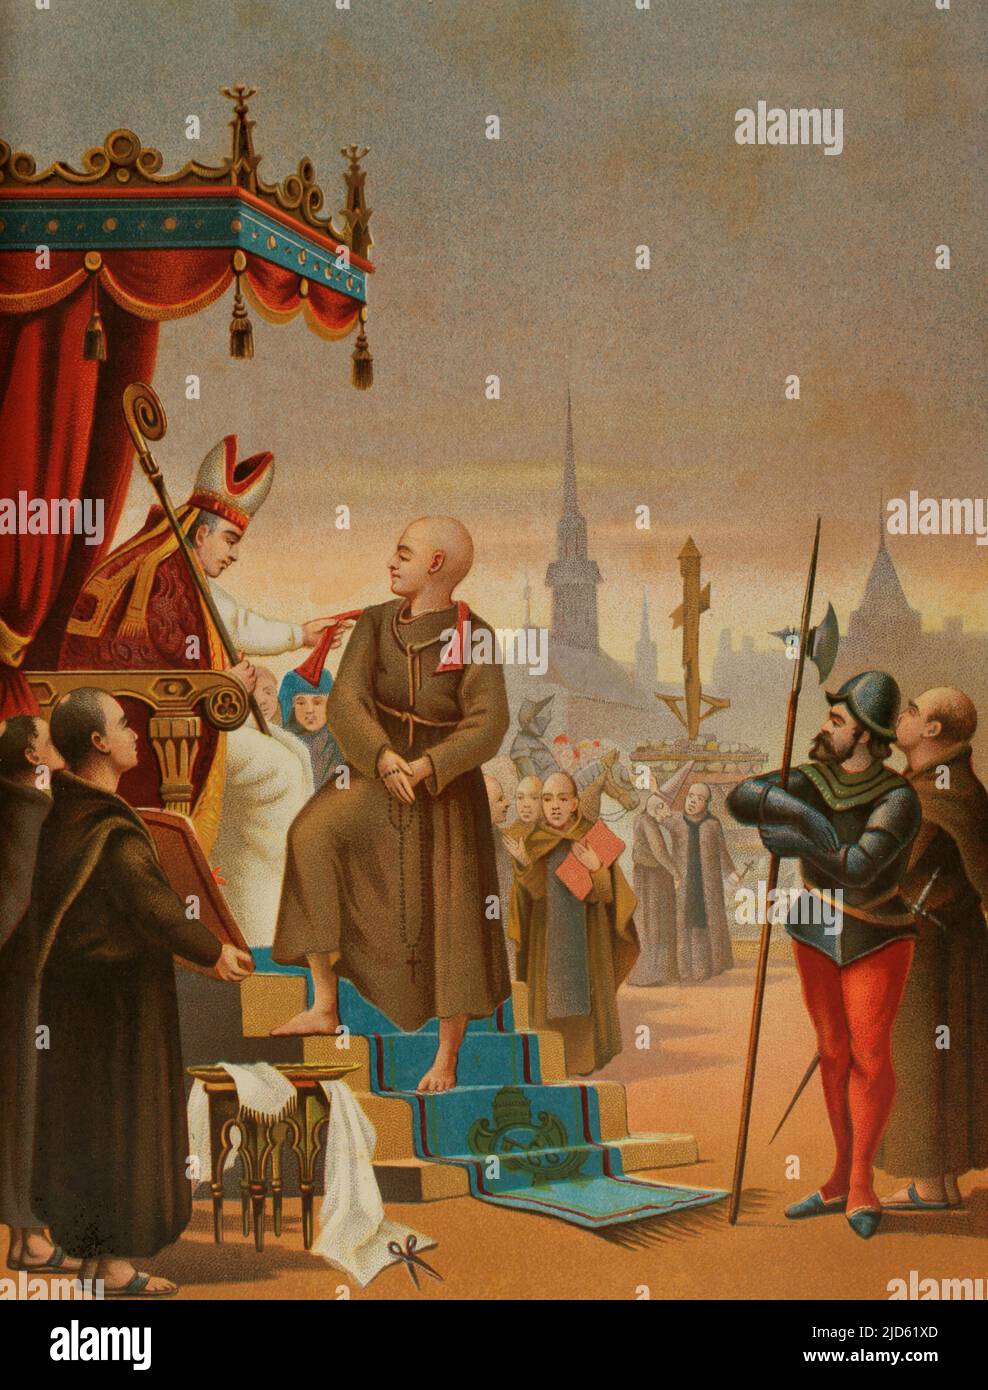 Girolamo Savonarola (1452-1498). Italian Dominican friar and preacher. Organiser of the Bonfire of the Vanities. Excommunicated and executed by the Tribunal of the Holy Inquisition. Degradation of Savonarola. Chromolithography. 'Historia Universal' (Universal History), by César Cantú. Volume VII. Published in Barcelona, 1886. Stock Photo